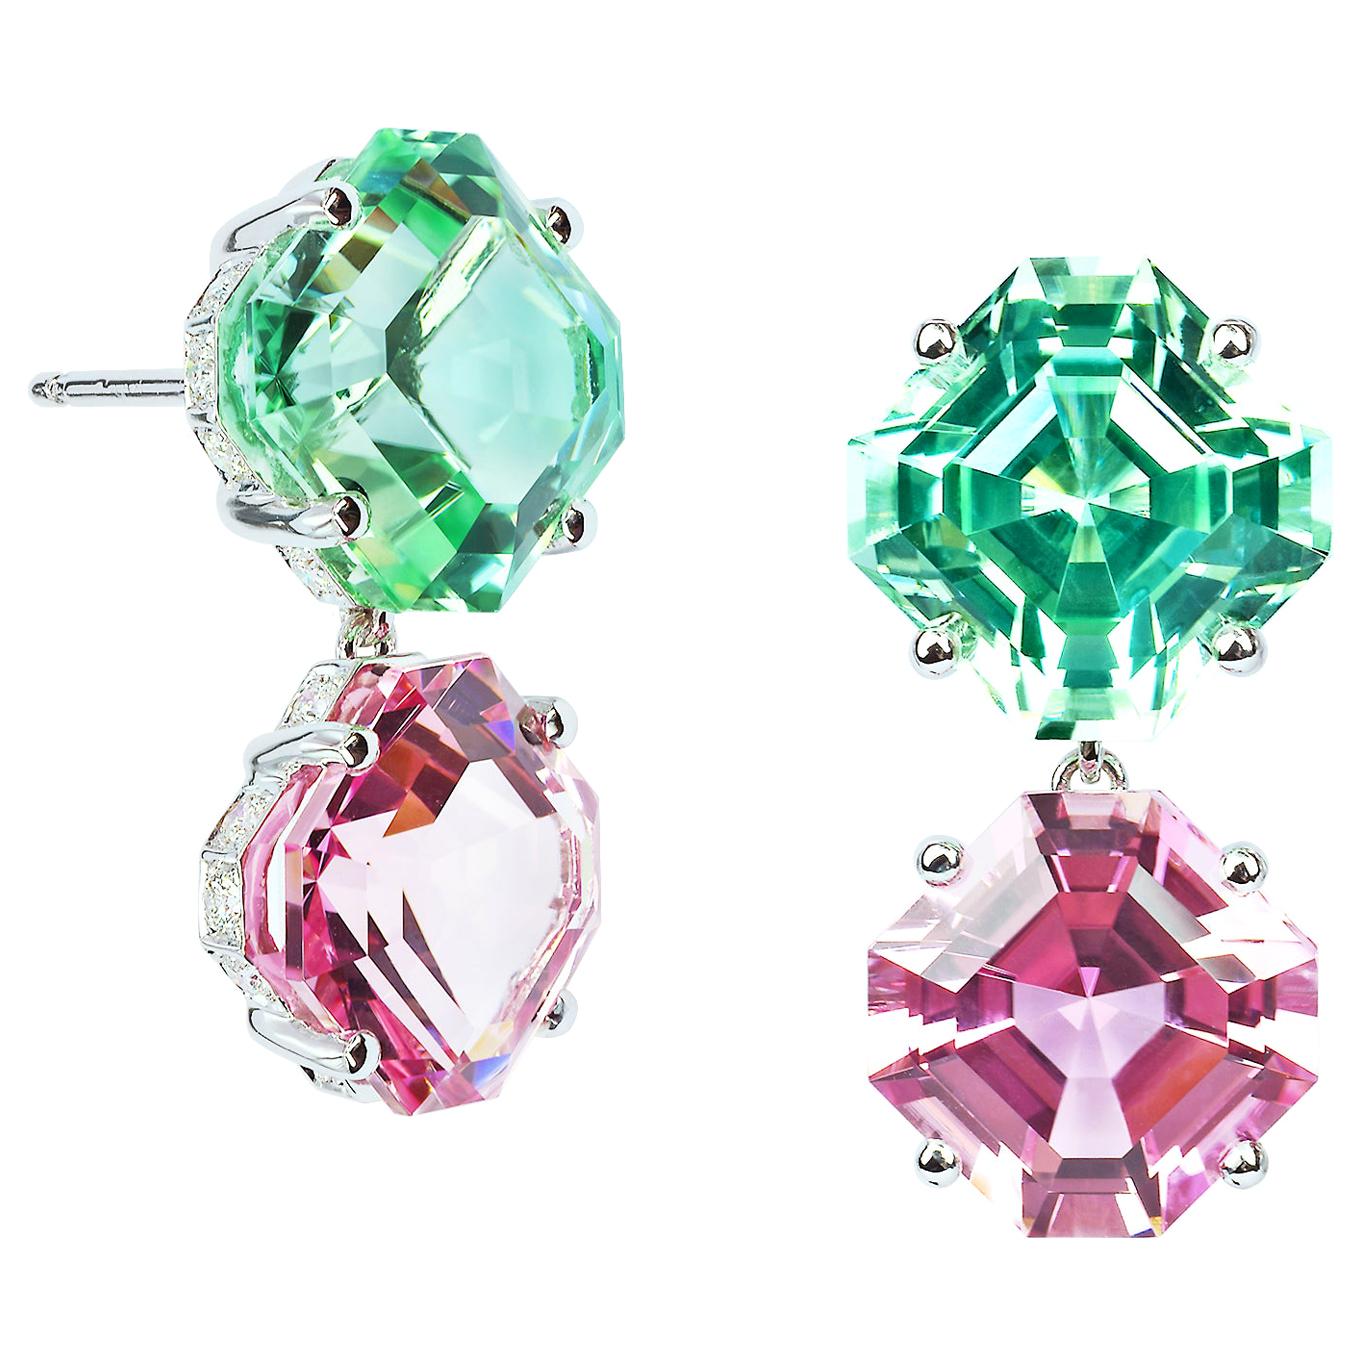 One of a kind mint and pink tourmaline earrings set in 18 karat white gold with round, brilliant diamond detailing. 

Emerald-cut mint tourmaline proportioned with emerald-cut pink tourmalines make this one of a kind pair of earrings one of the most